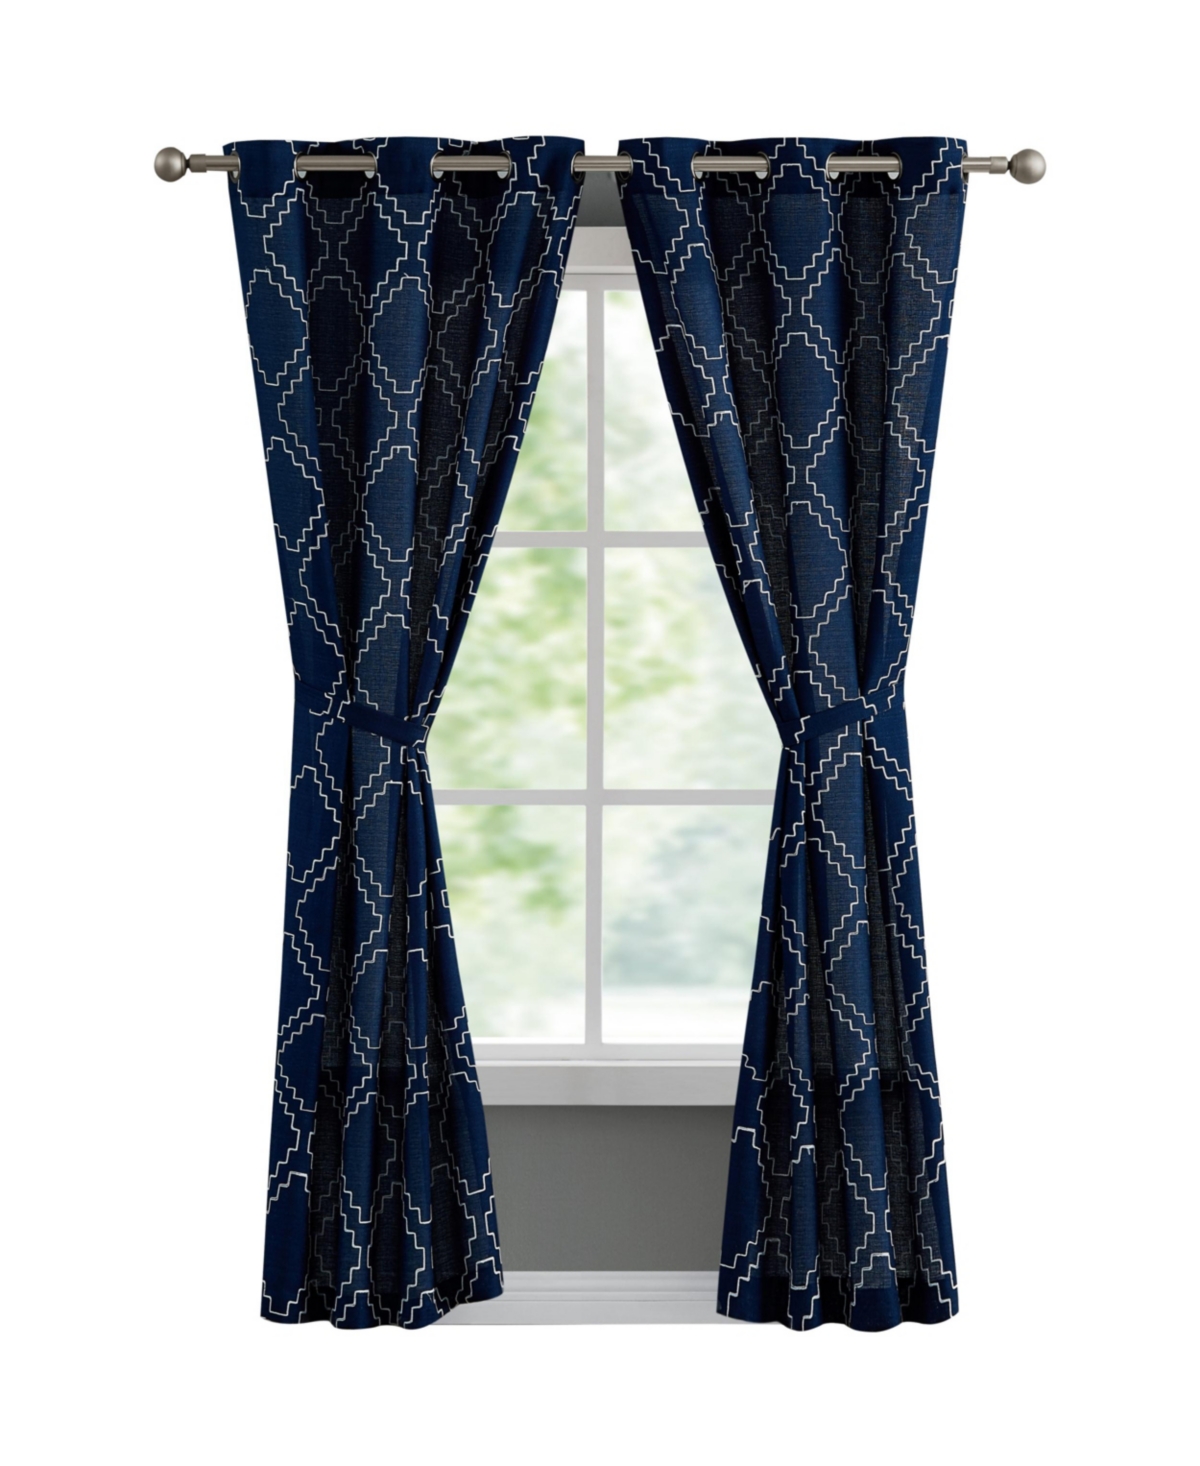 French Connection Somerset Embroidered Light Filtering Grommet Window Curtain Panel Pair With Tiebacks, 38" X 96" In Indigo